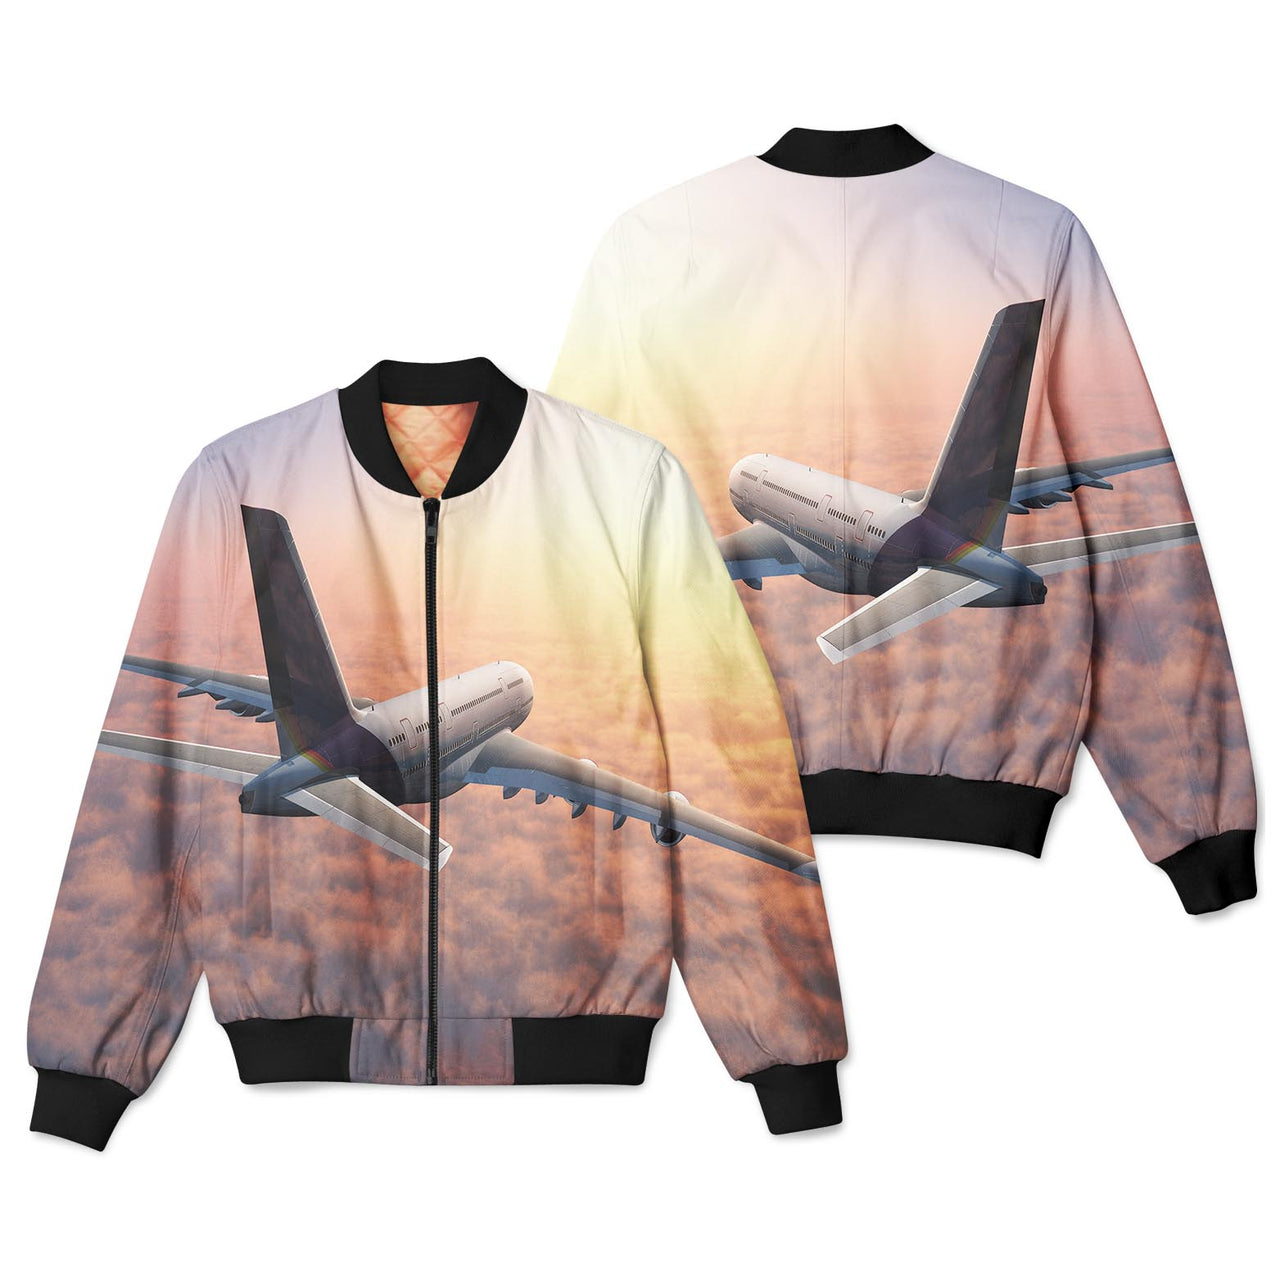 Super Cruising Airbus A380 over Clouds Designed 3D Pilot Bomber Jackets